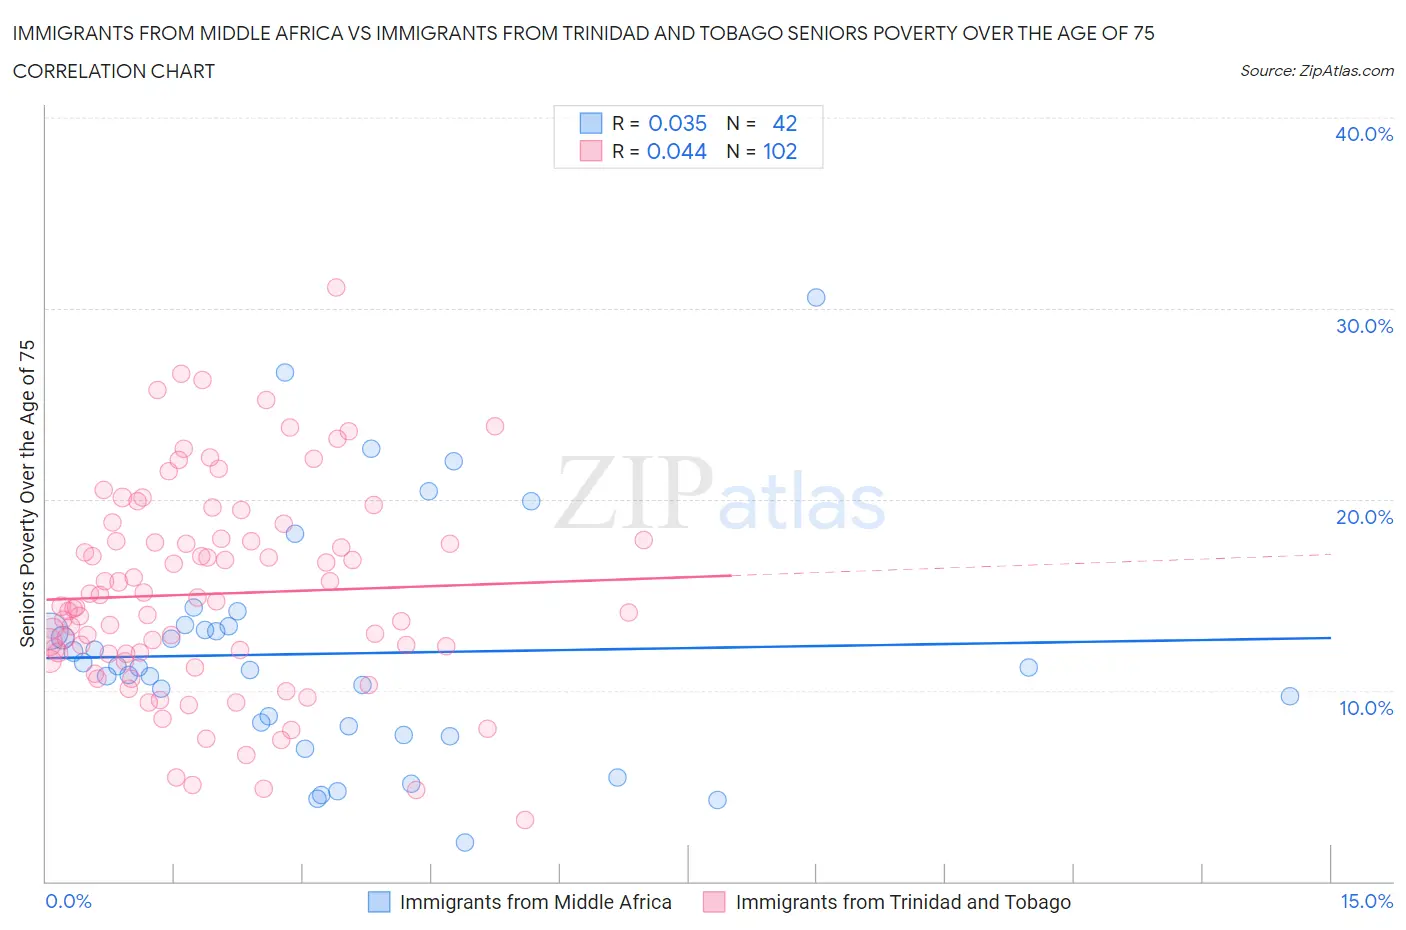 Immigrants from Middle Africa vs Immigrants from Trinidad and Tobago Seniors Poverty Over the Age of 75